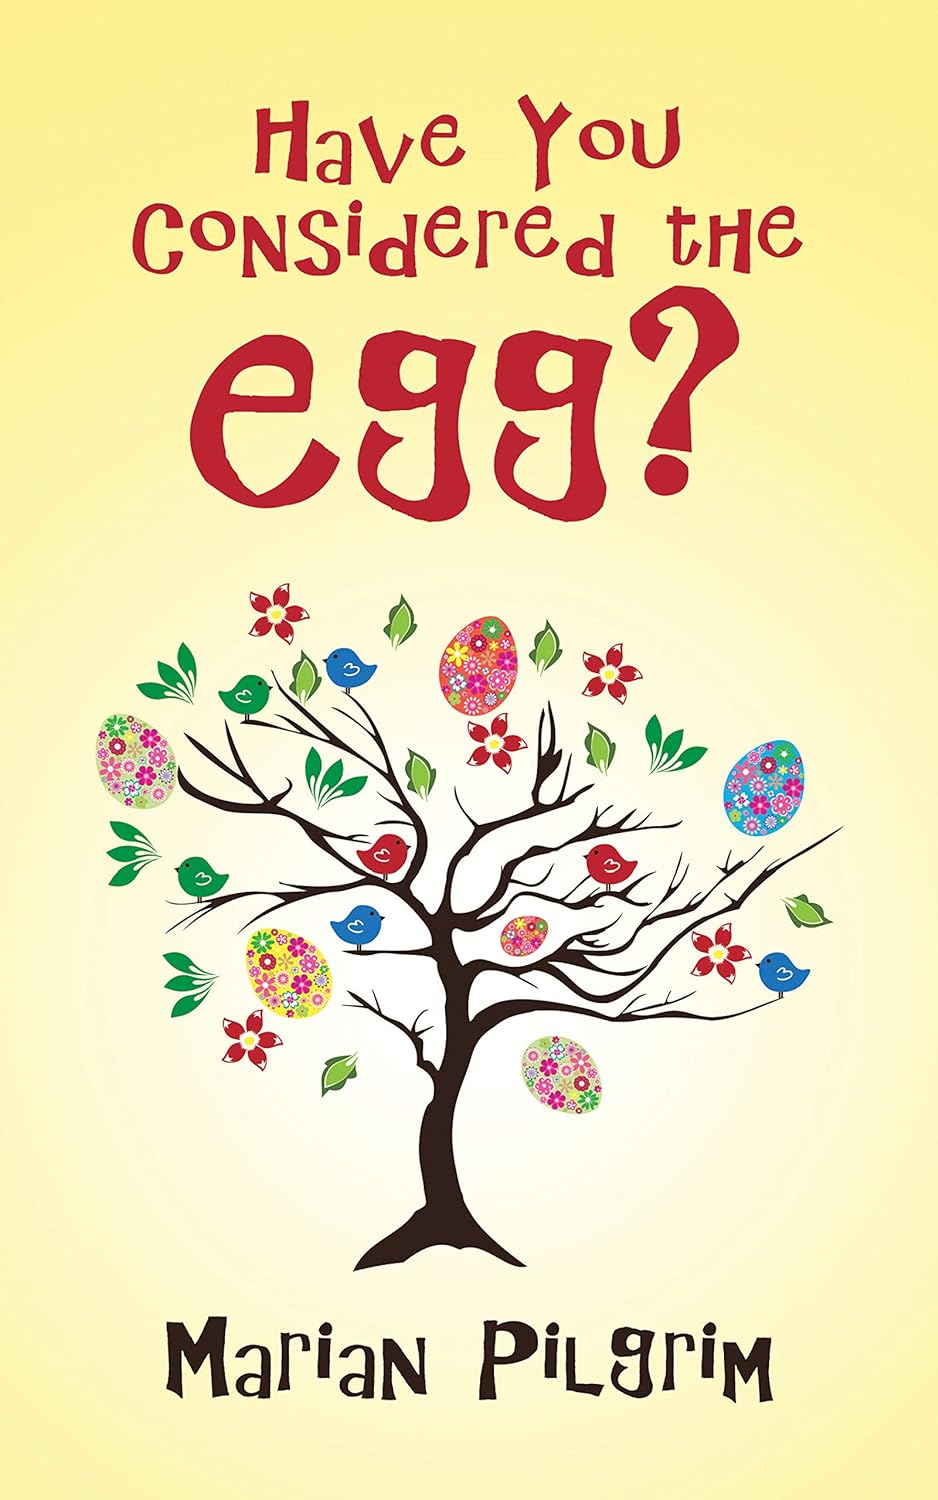 Marian A. Pilgrim Unveils Transformational Insights in Latest Book "Have You Considered the Egg?"